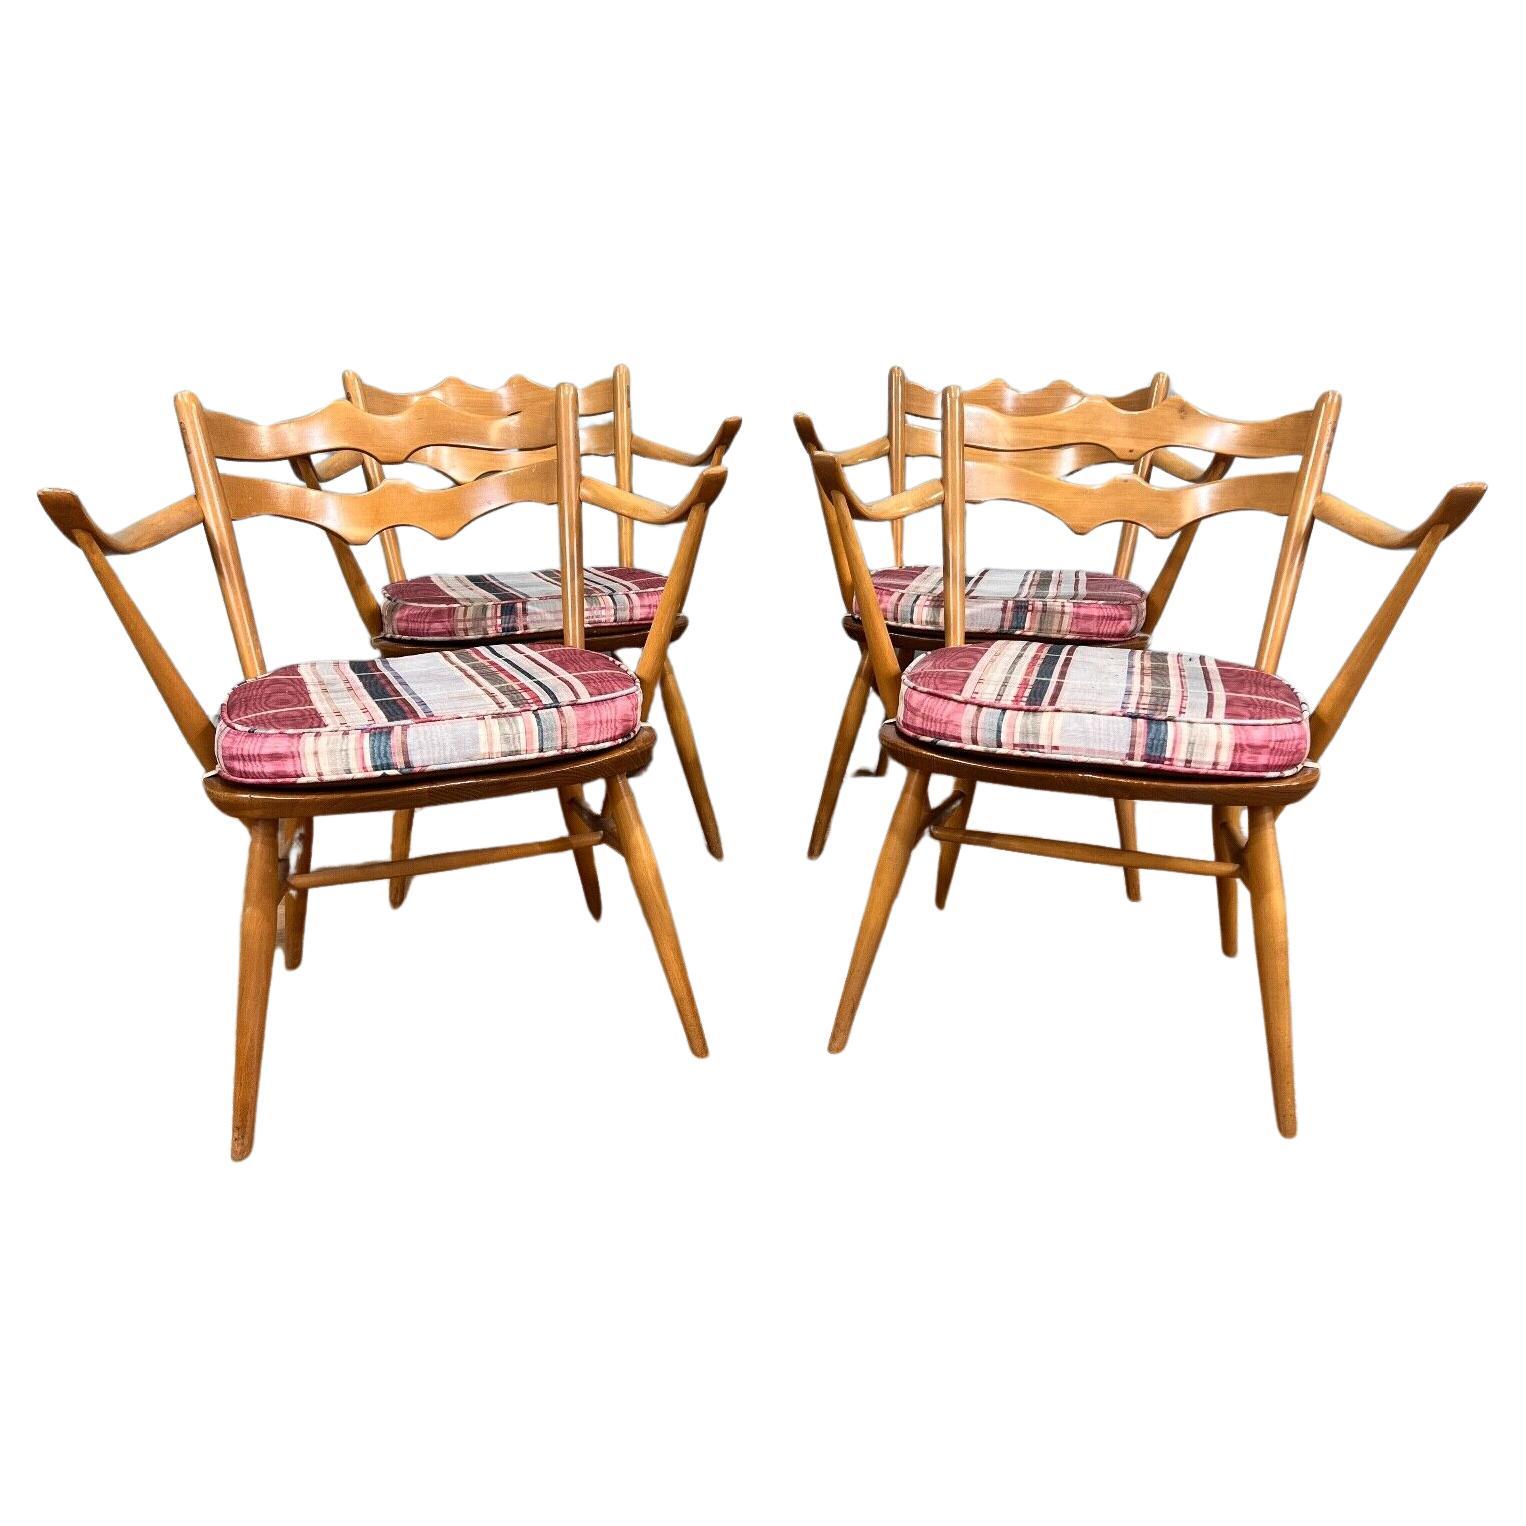 Set of four Ercol arm chairs in beech wood
These are the batwing model number 793
Great look to this set of Mid Century chairs circa 1960s
Ercol is renowned for its timeless furniture designs that seamlessly blend craftsmanship, functionality, and